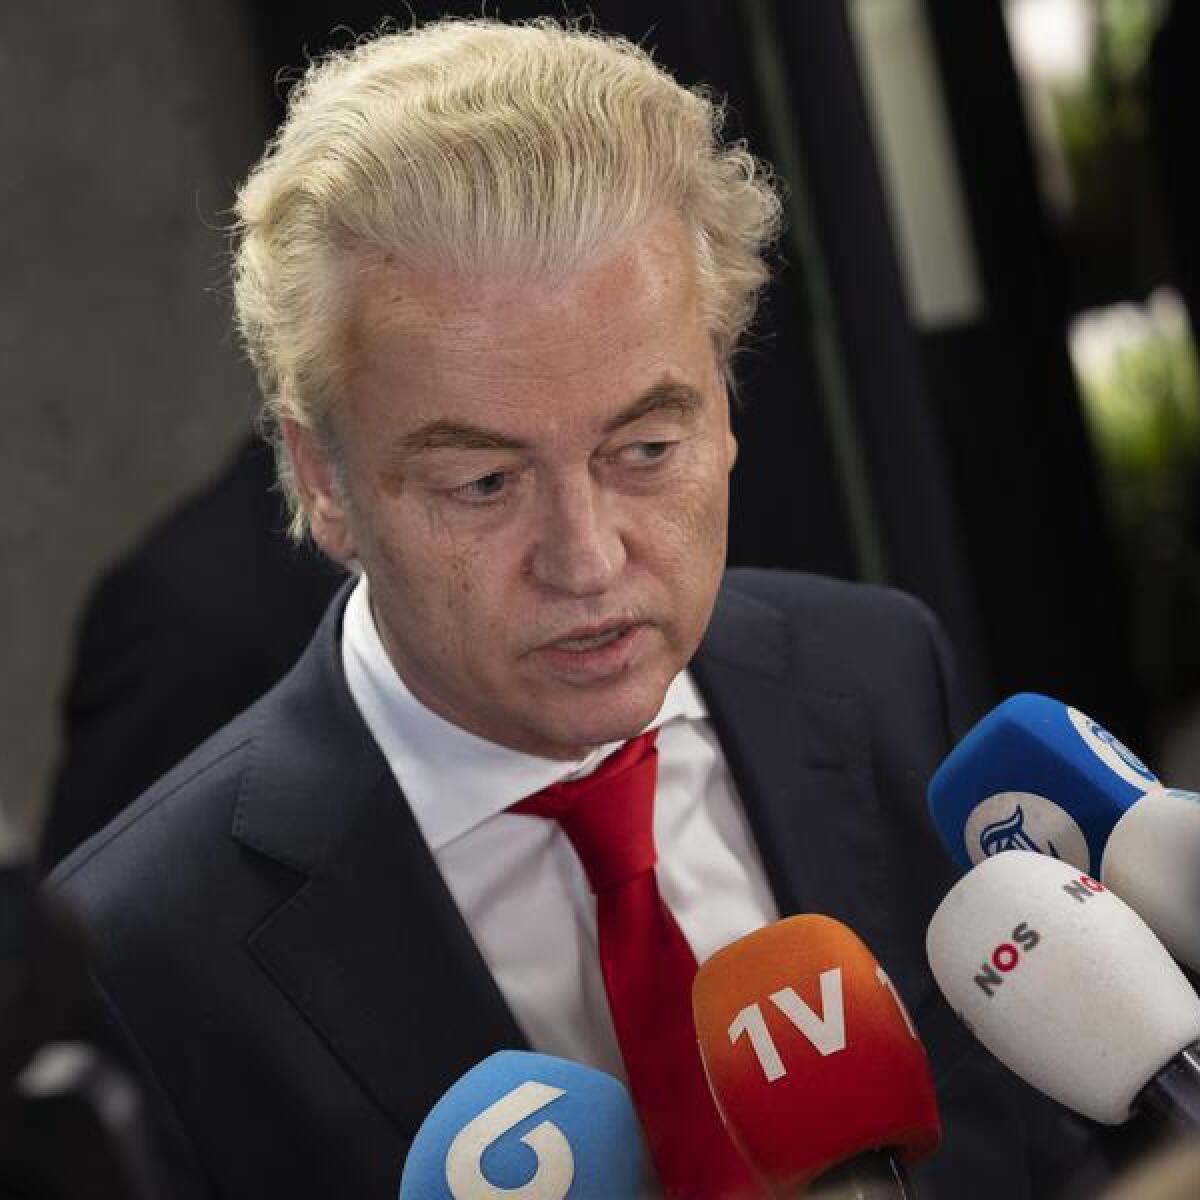 Party for Freedom leader Geert Wilders